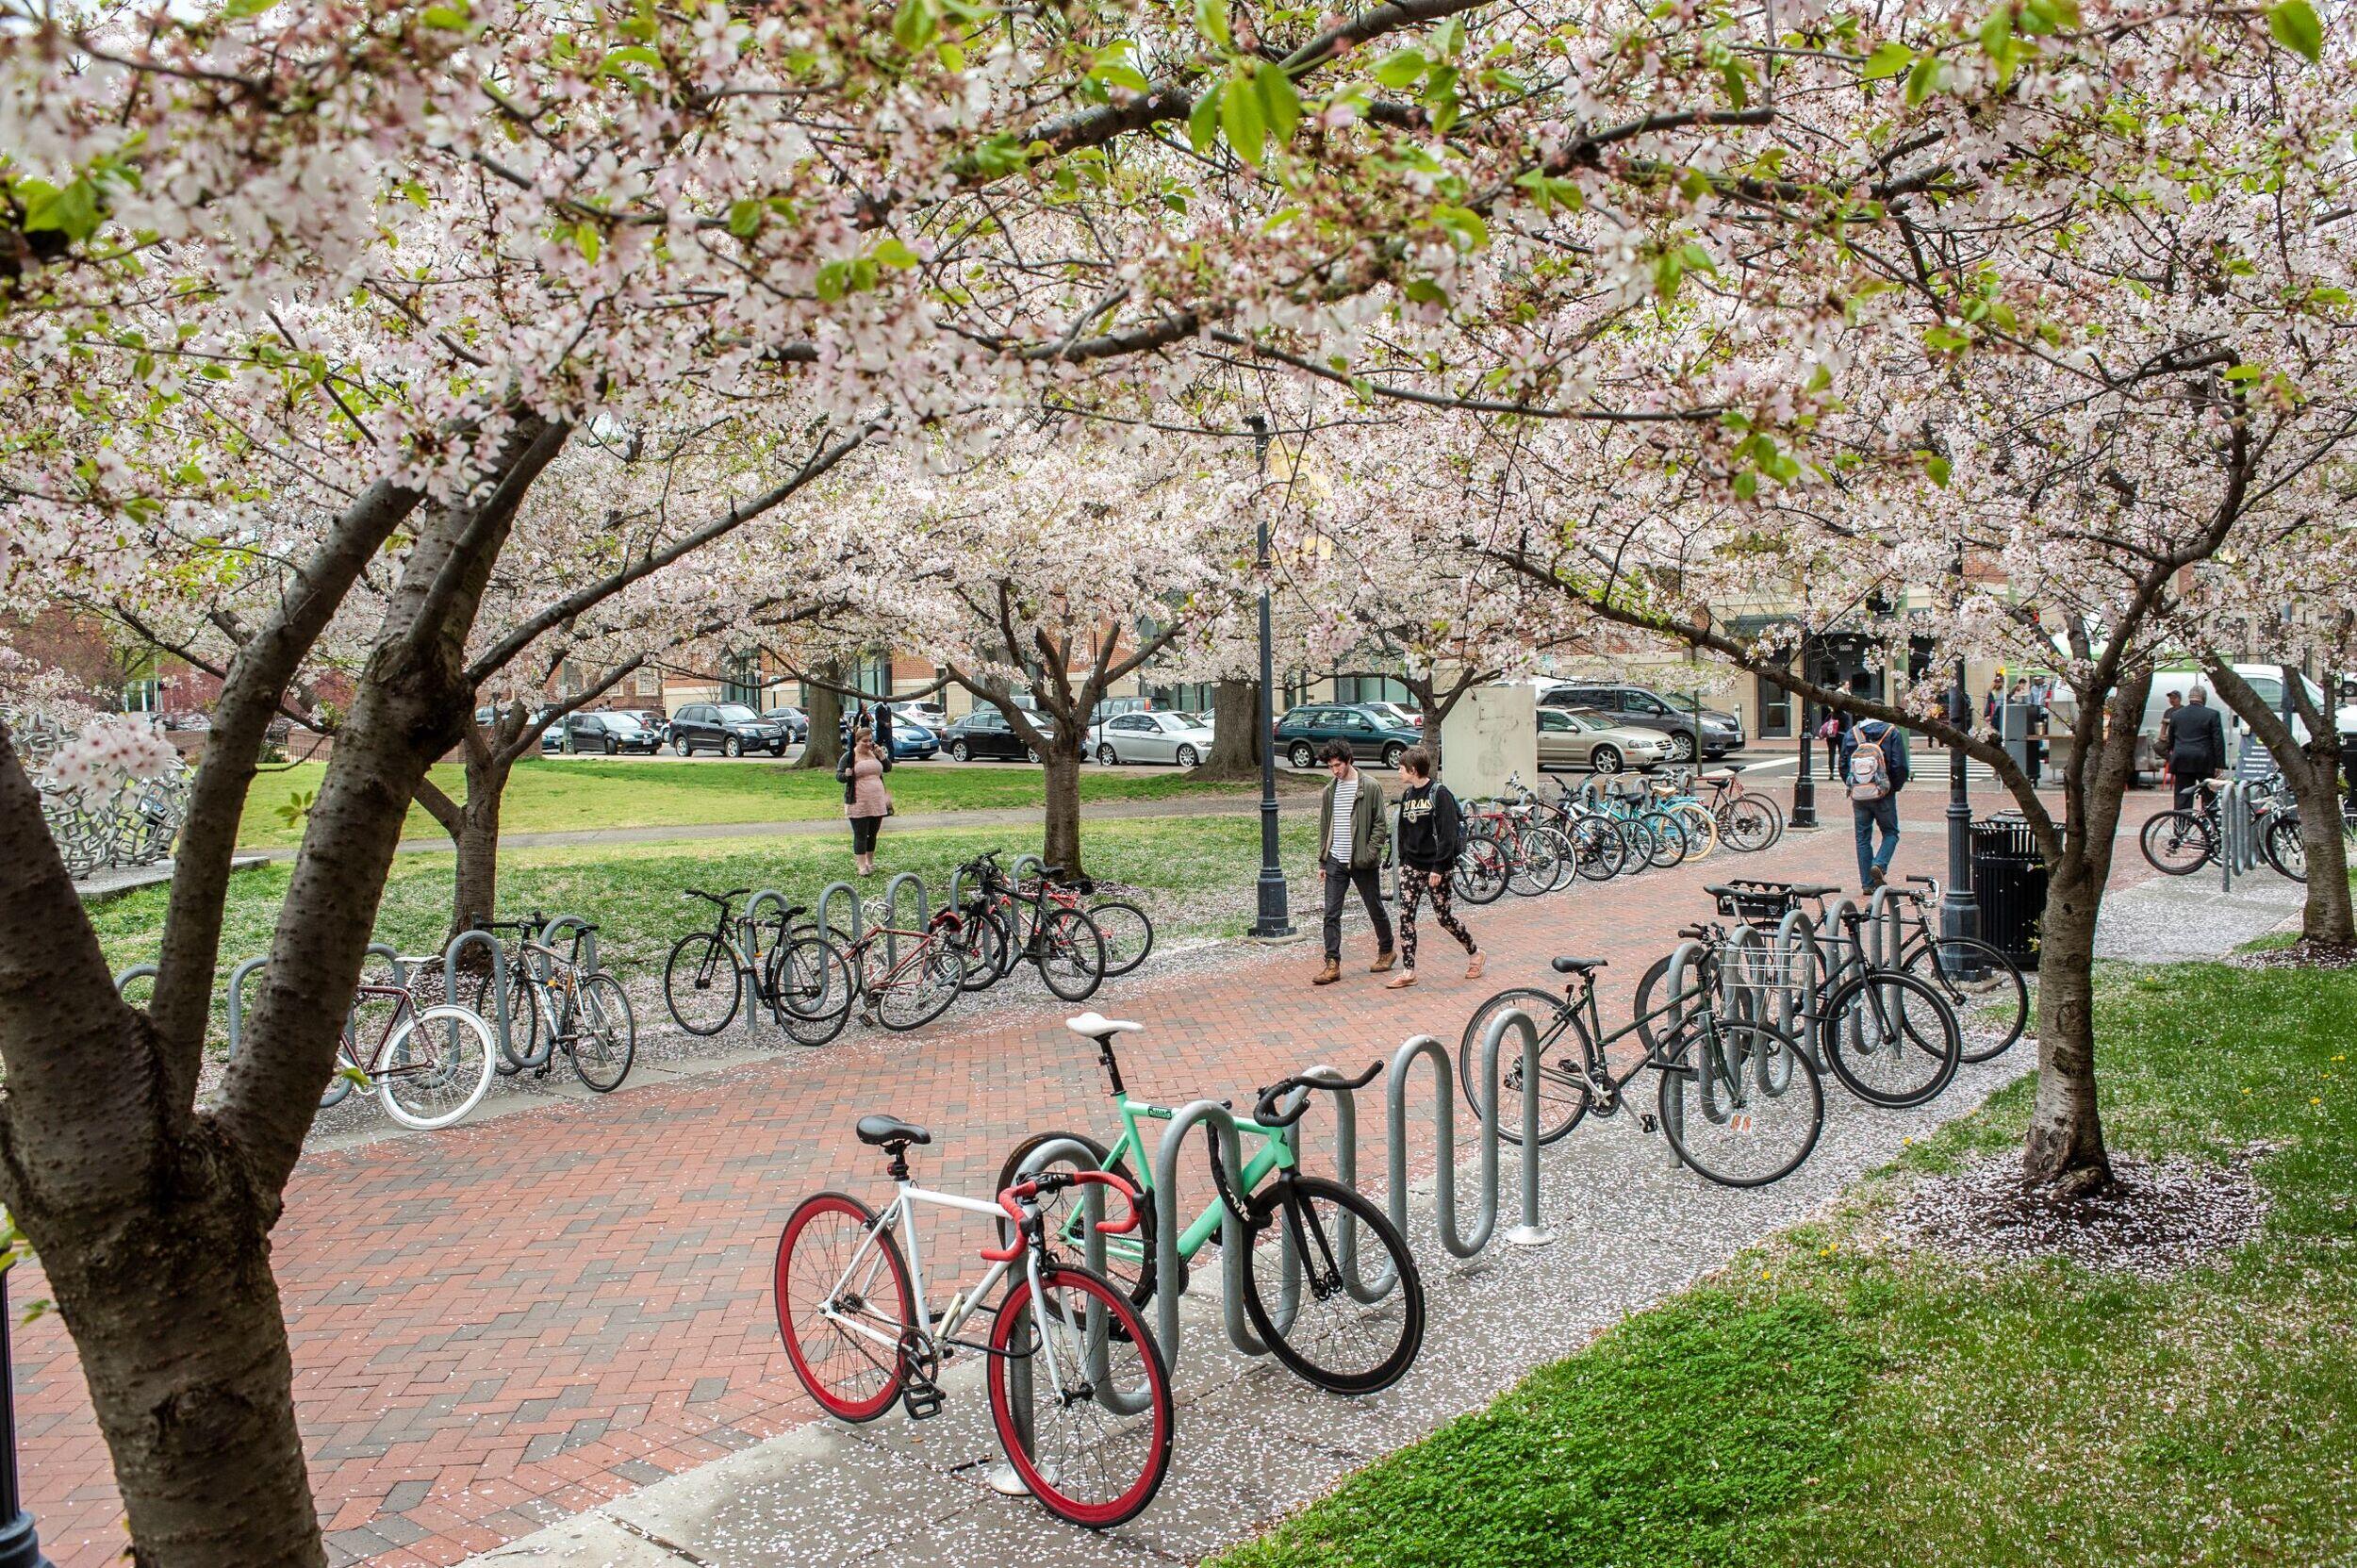 People walk down a campus walkway lined with trees and bike racks.